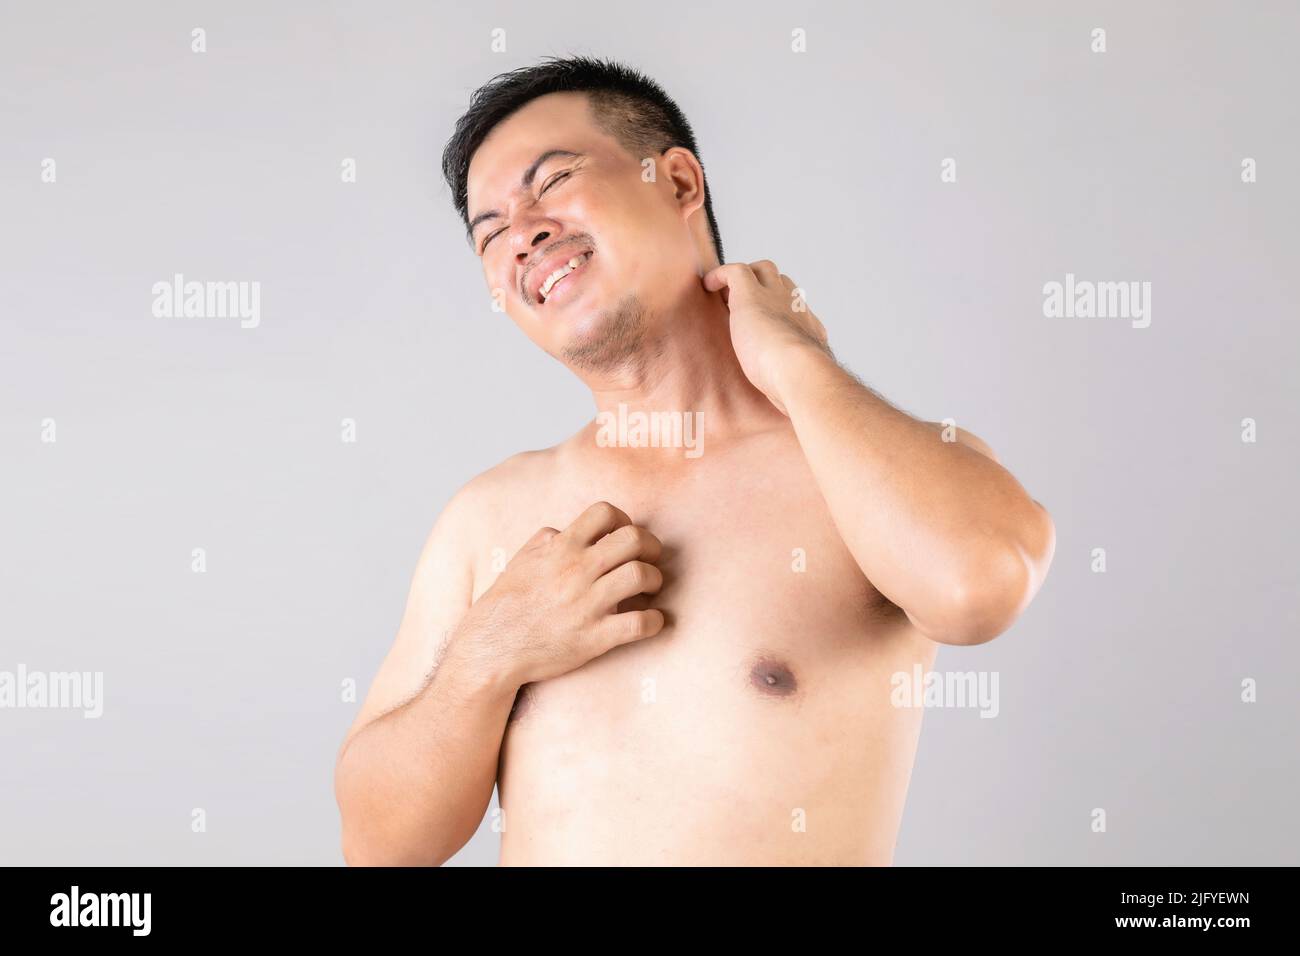 Health care or Itchy or Tinea Cruris concept : Portrait of people using hands to Scratching on his body. Studio shot on grey background Stock Photo